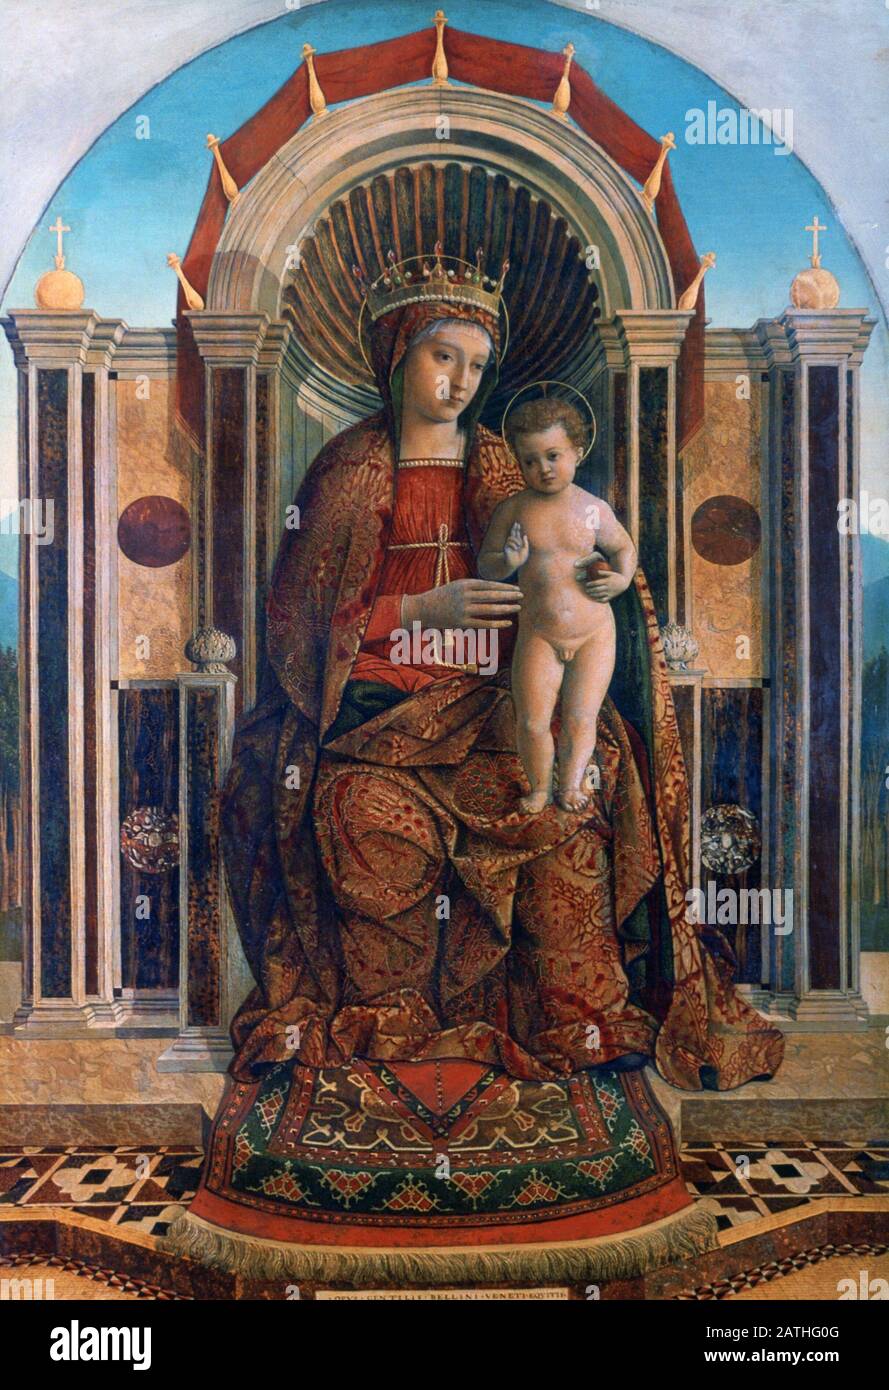 Giovanni Bellini Italian school The Virgin and Child Enthroned About 1475-1485 Oil on wood (121.9 x 82.6 cm) London, National Gallery Stock Photo